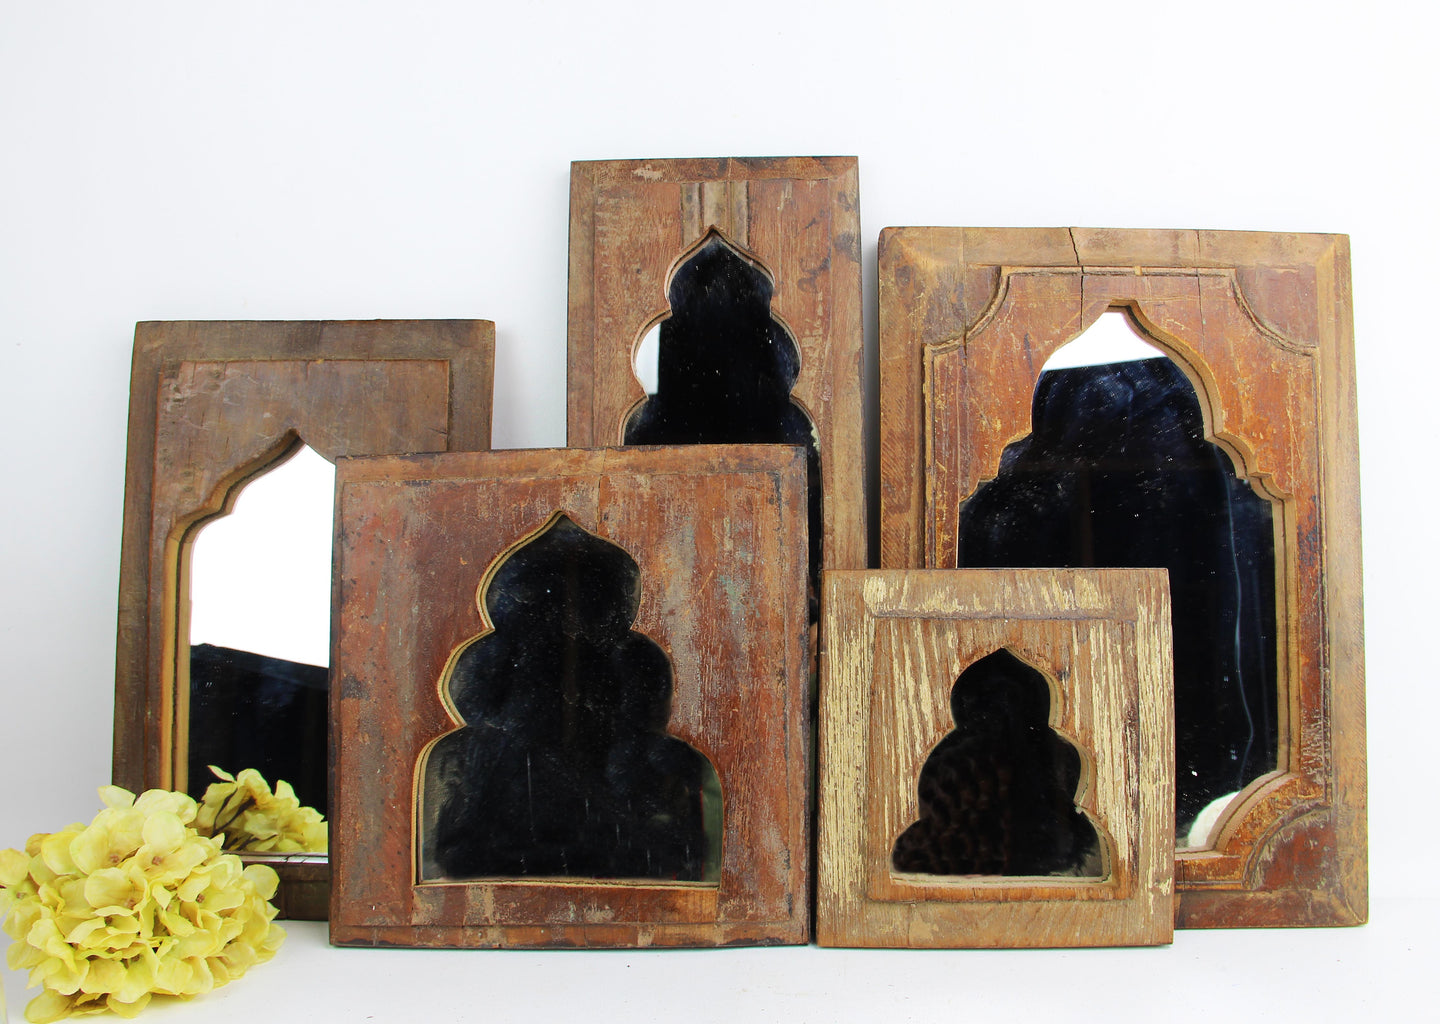 Vintage style Petite Archway Mirrors